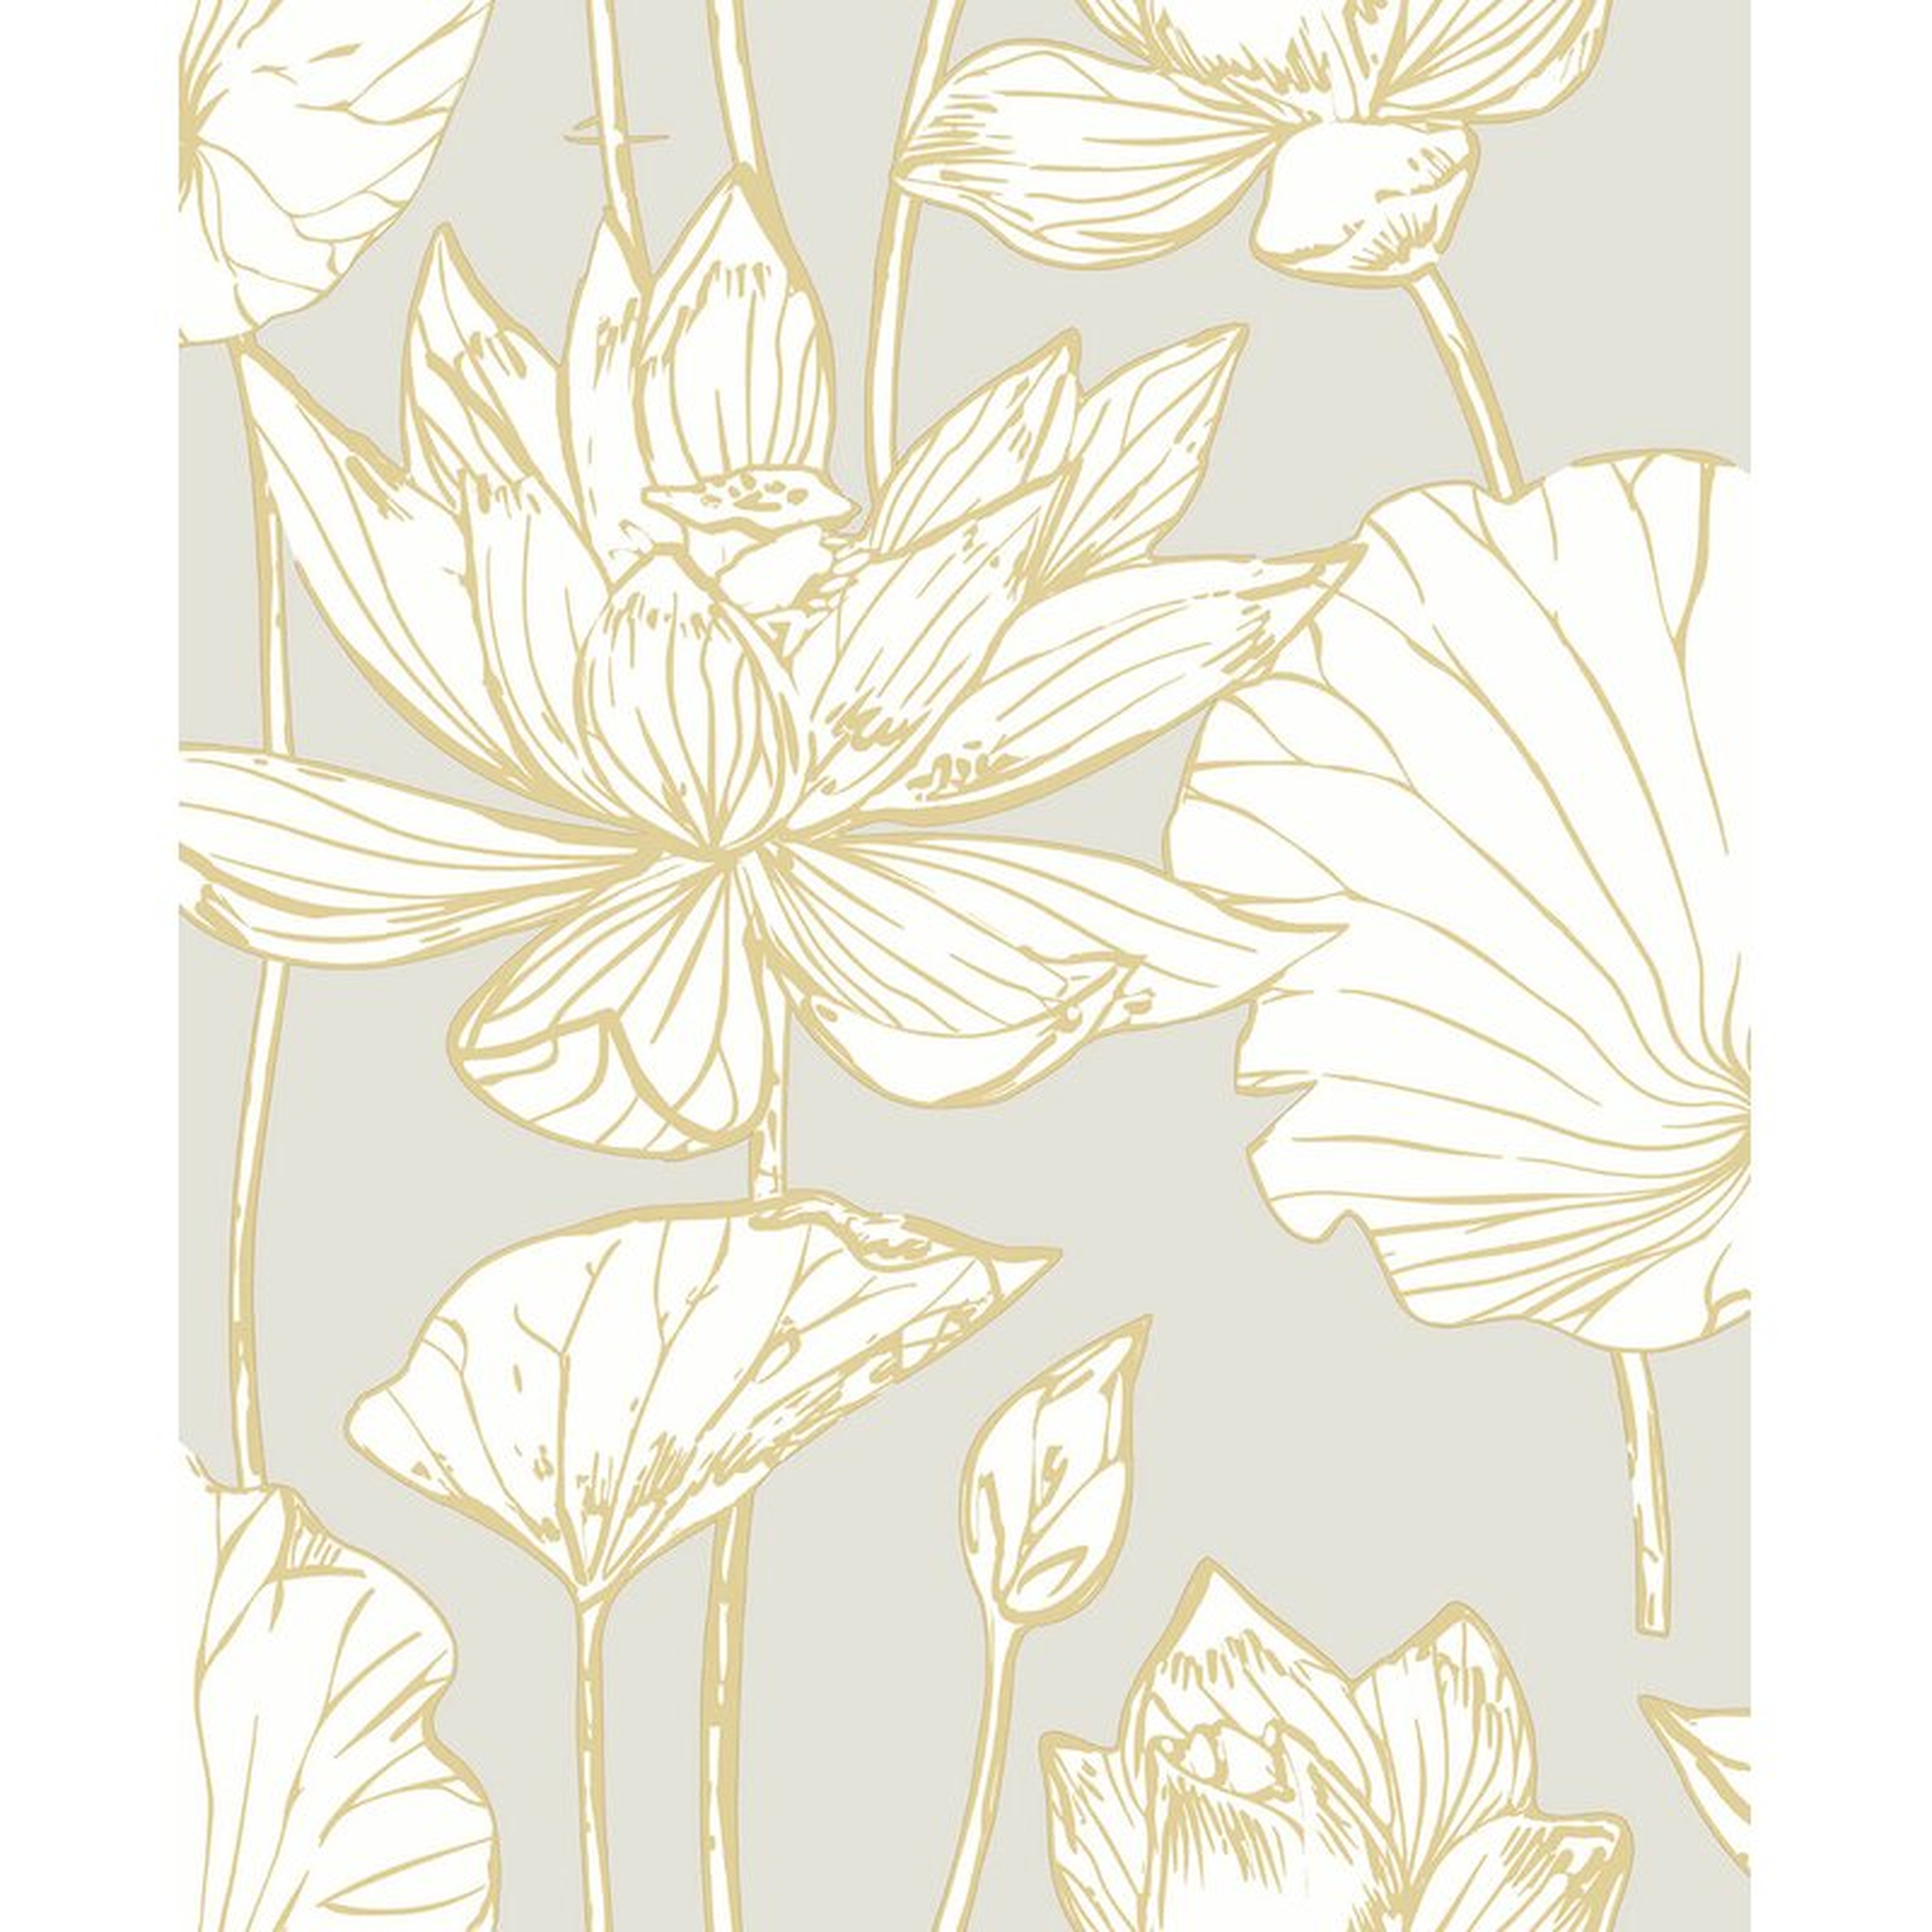 Thionville Lotus Floral 18' L x 20.5" W Peel and Stick Wallpaper Roll - Wayfair